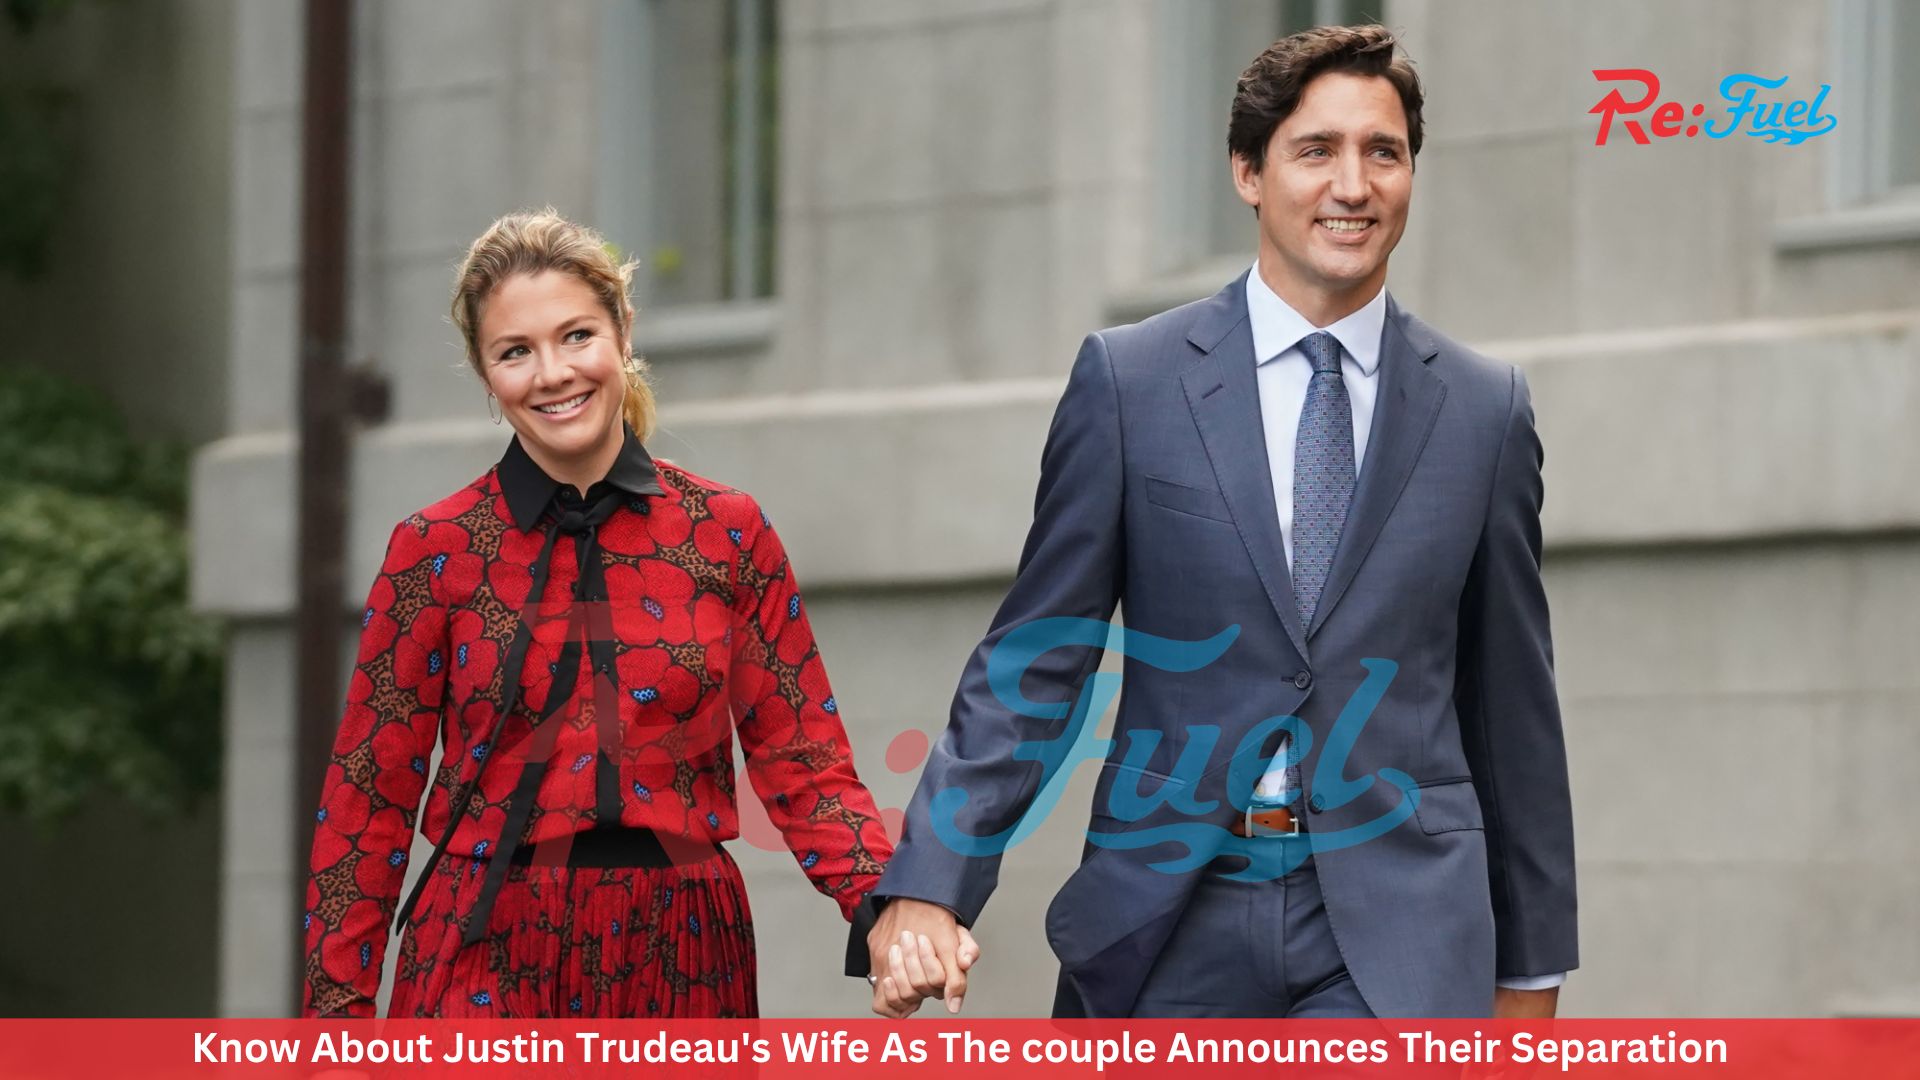 Know About Justin Trudeau's Wife As The couple Announces Their Separation